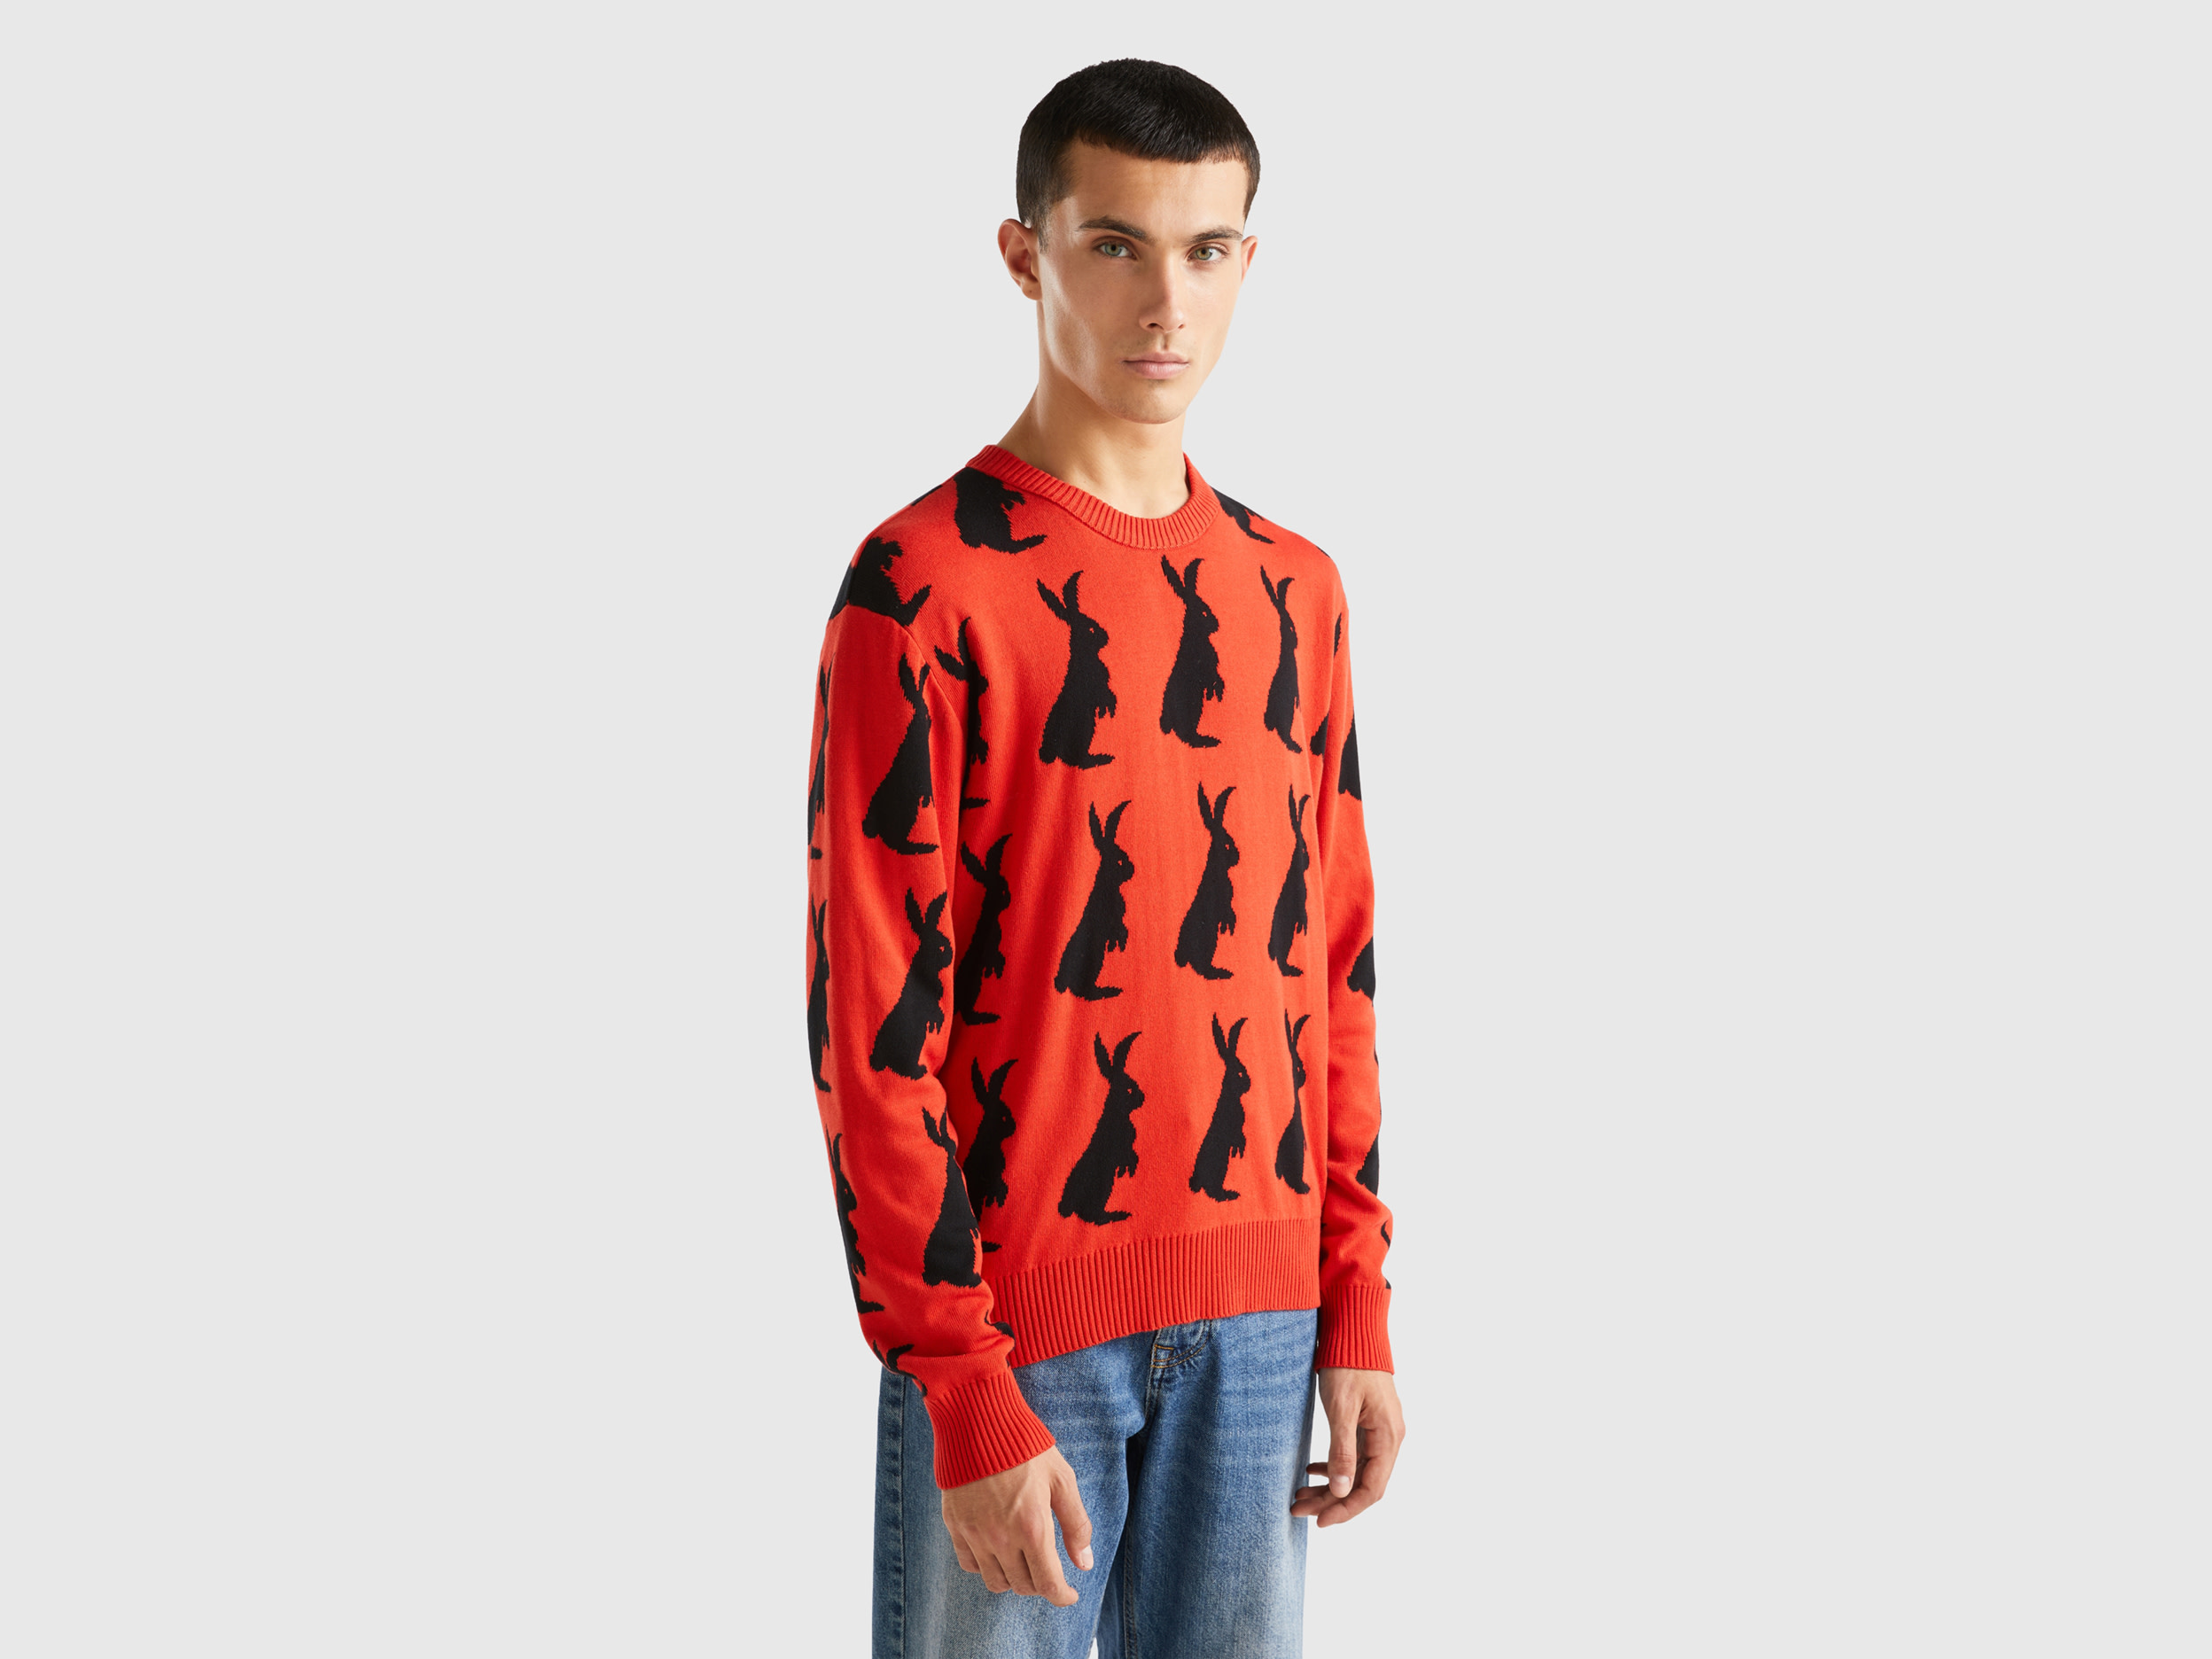 Benetton, Sweater With Bunny Pattern, size L, Red, Men